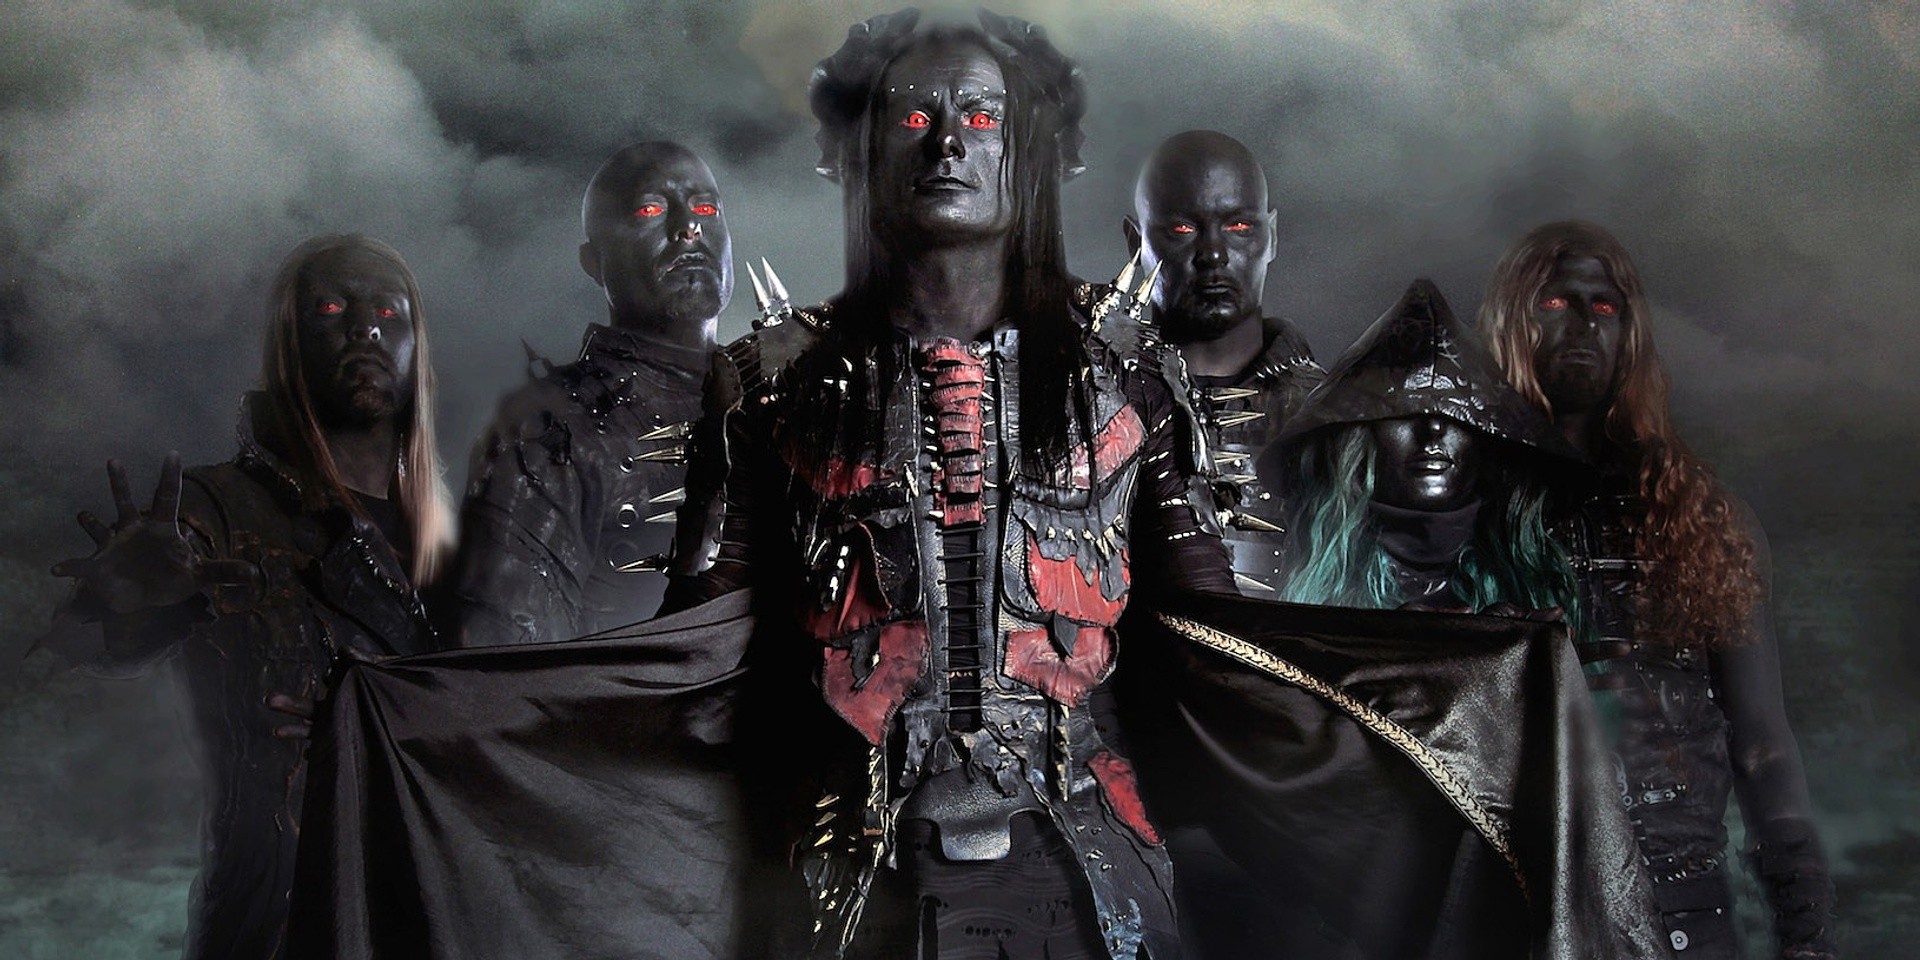 Cradle Of Filth to perform in Jakarta, Indonesia this month